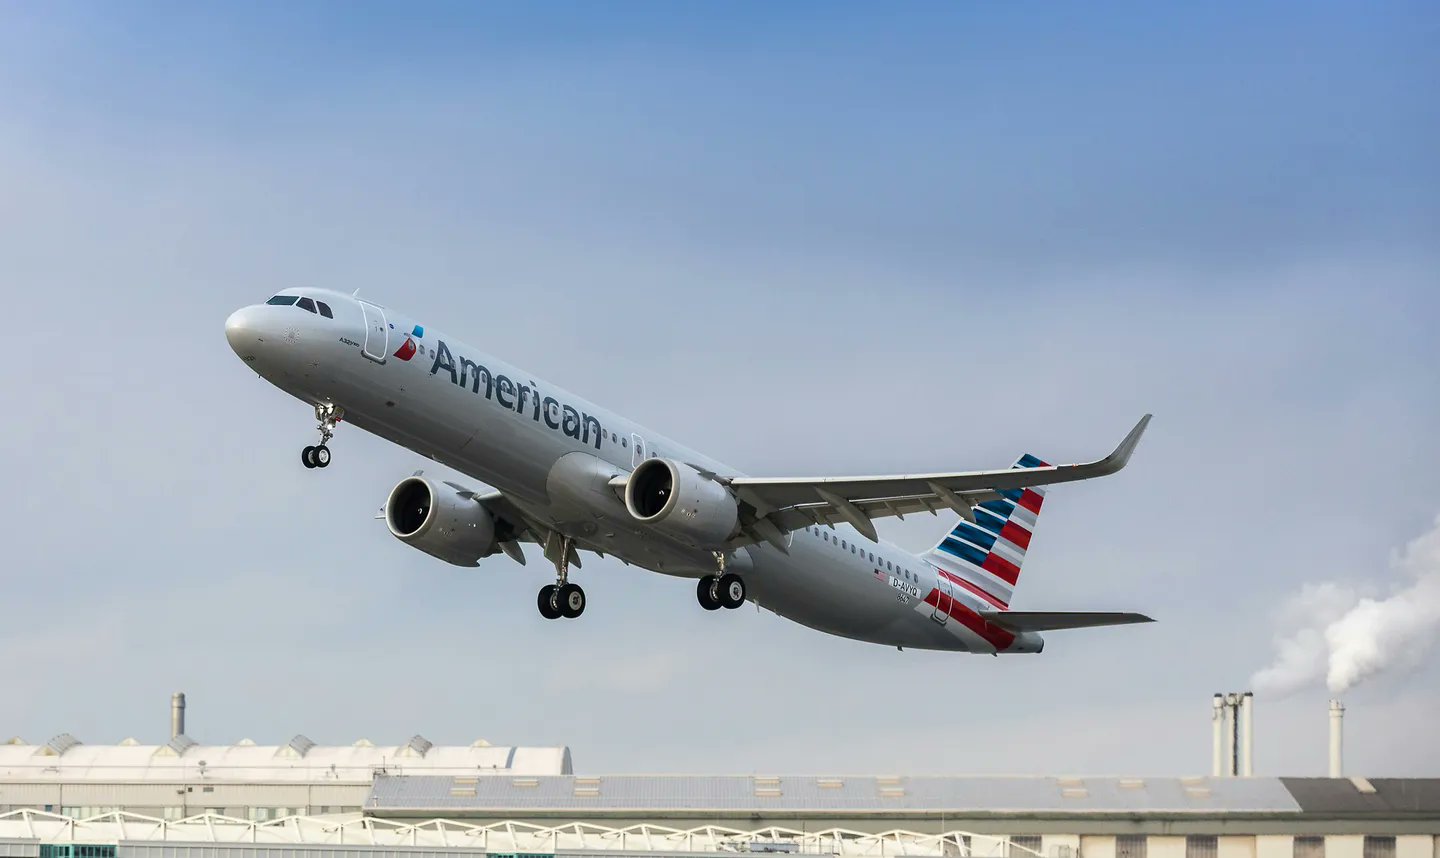 American Airlines A321neo. Image: Airbus